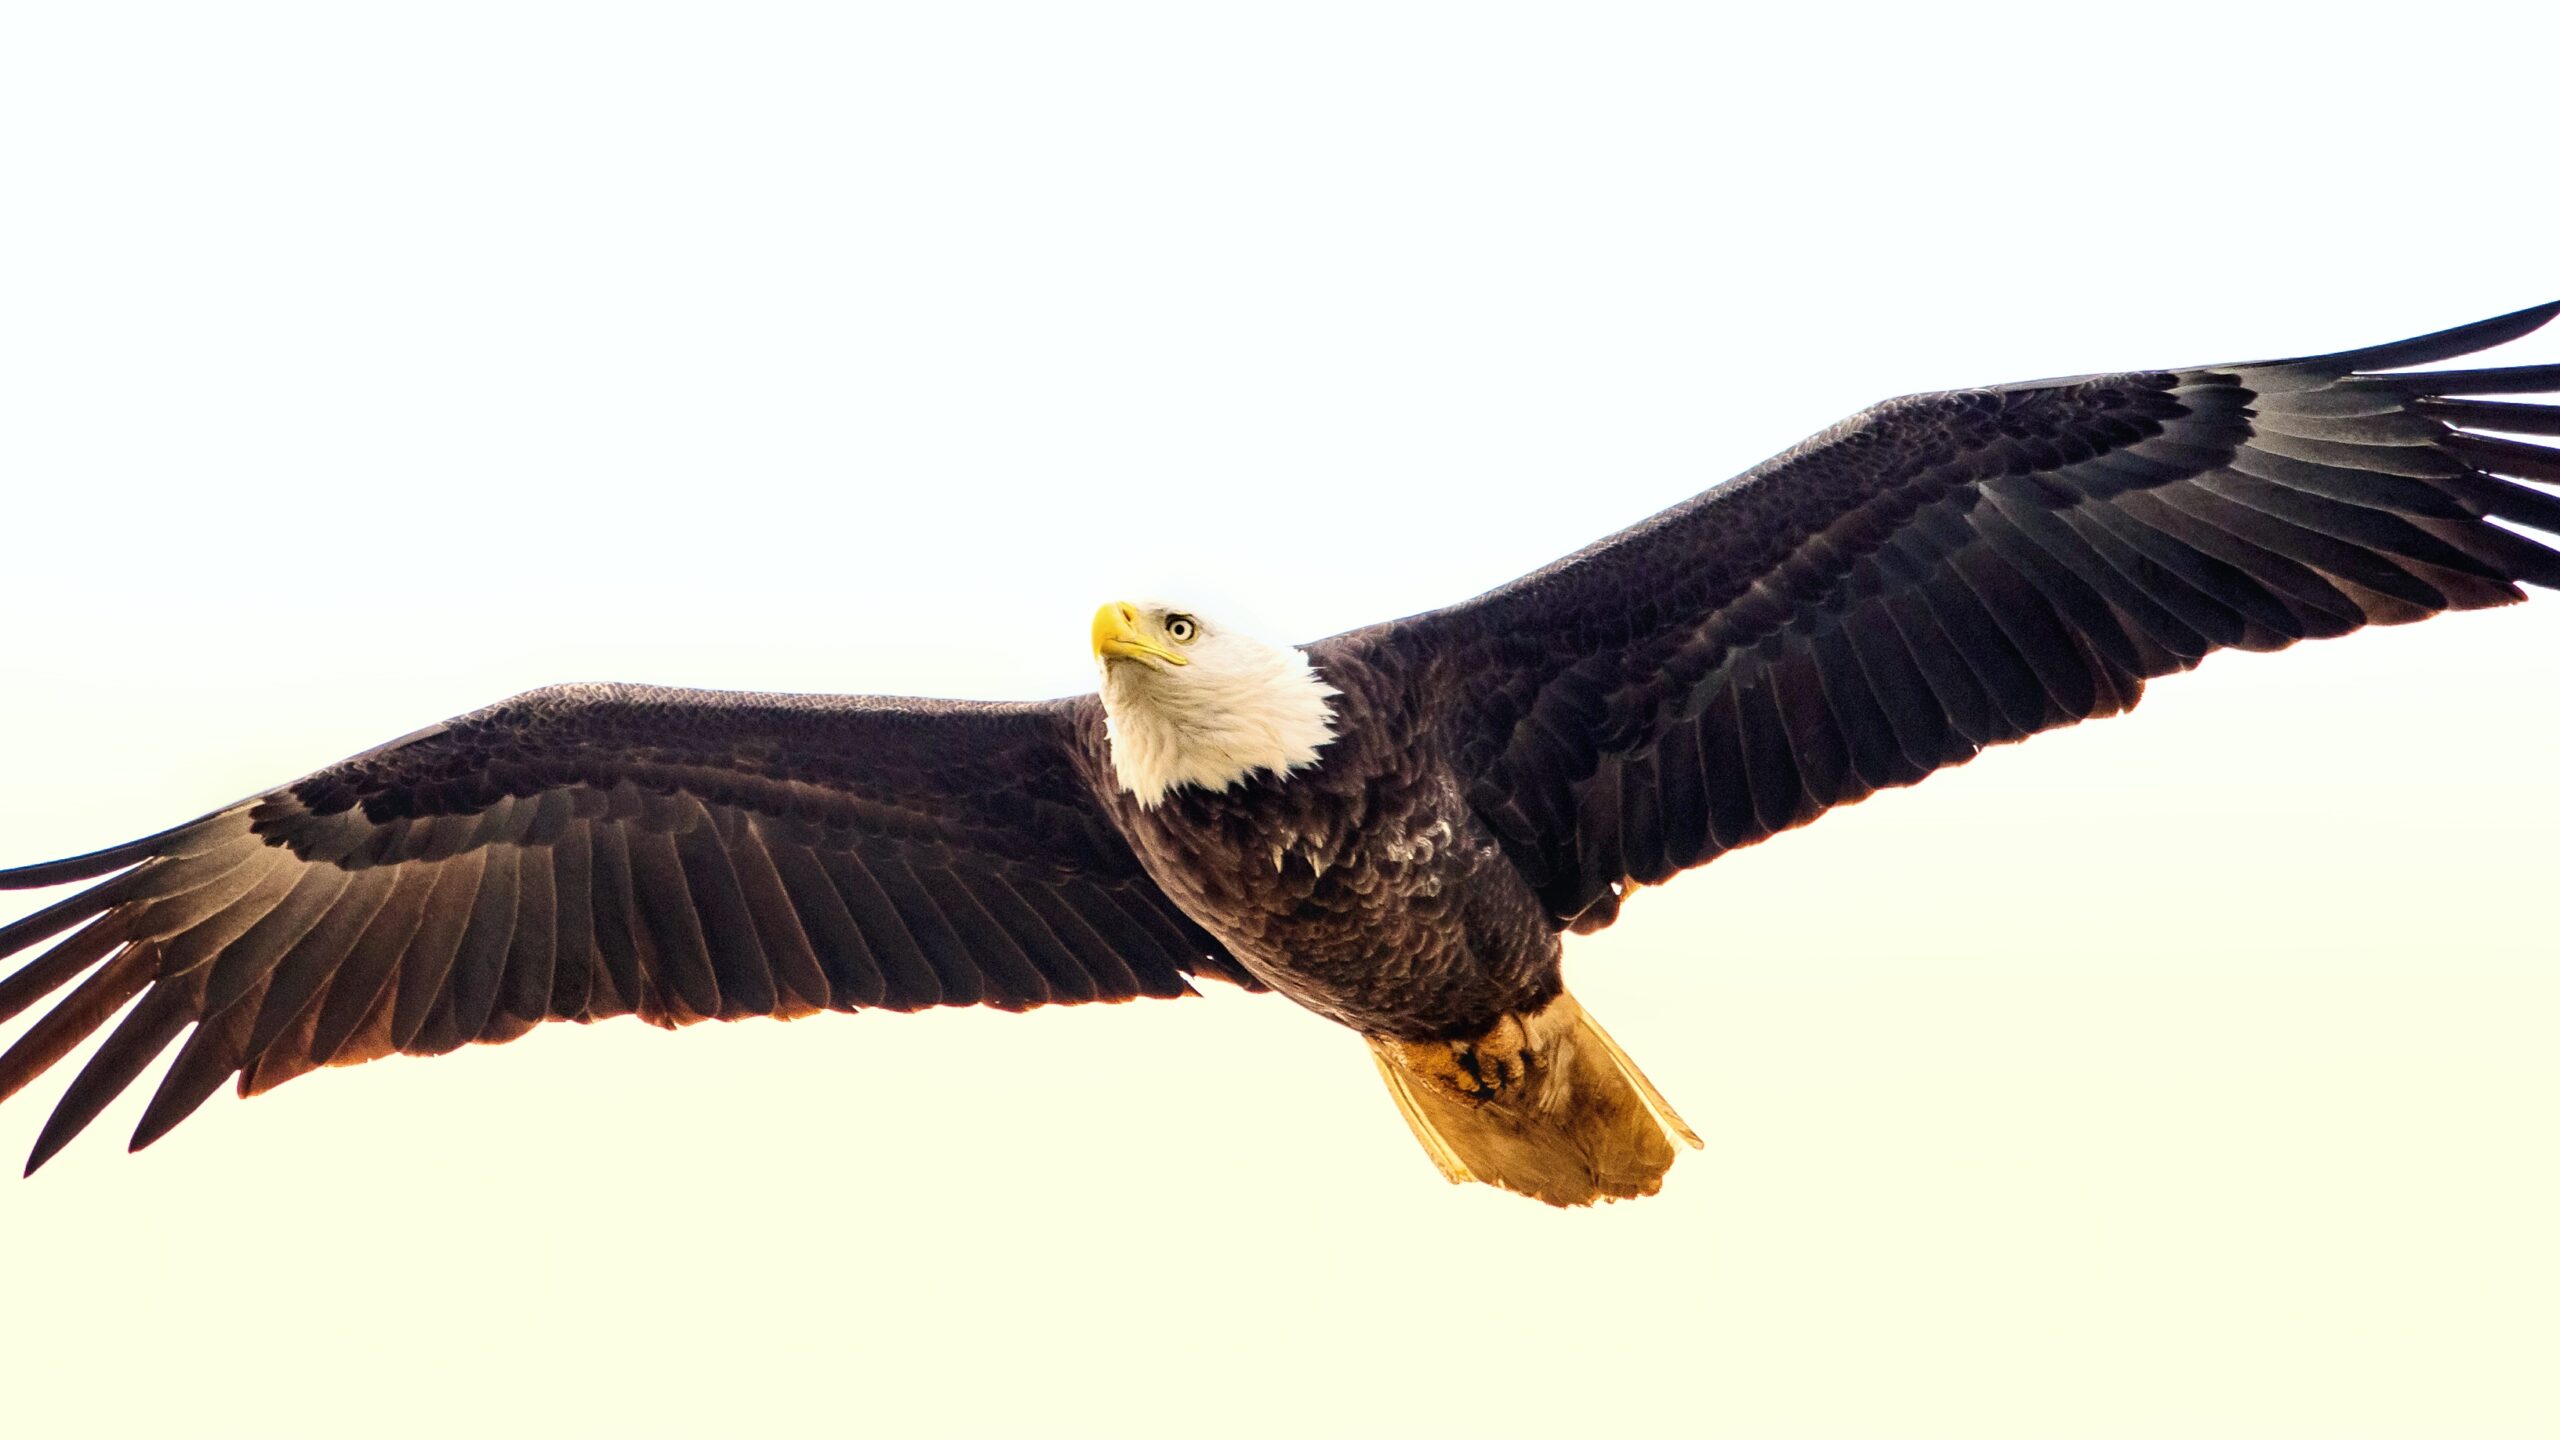 bald eagle in flight with full wing span